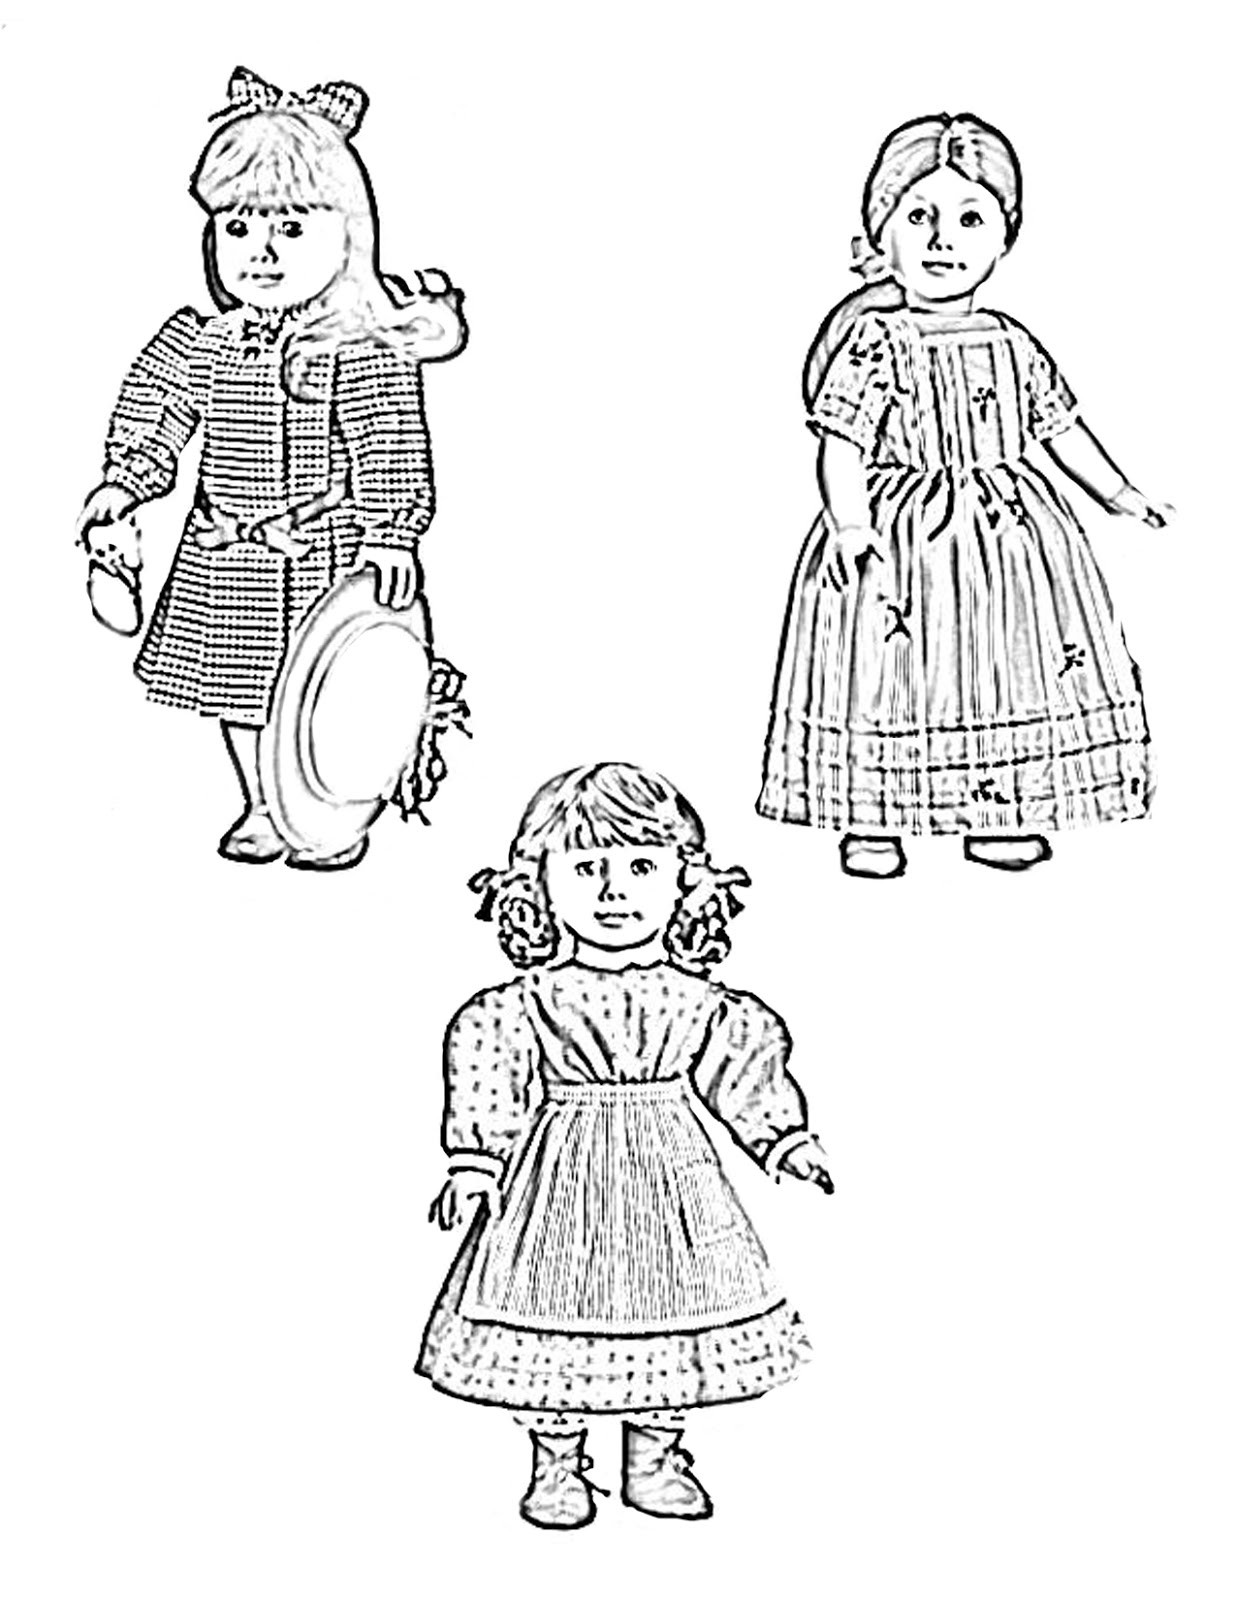 American Girl Doll Isabelle Coloring Pages
 American Doll Isabelle Coloring Pages